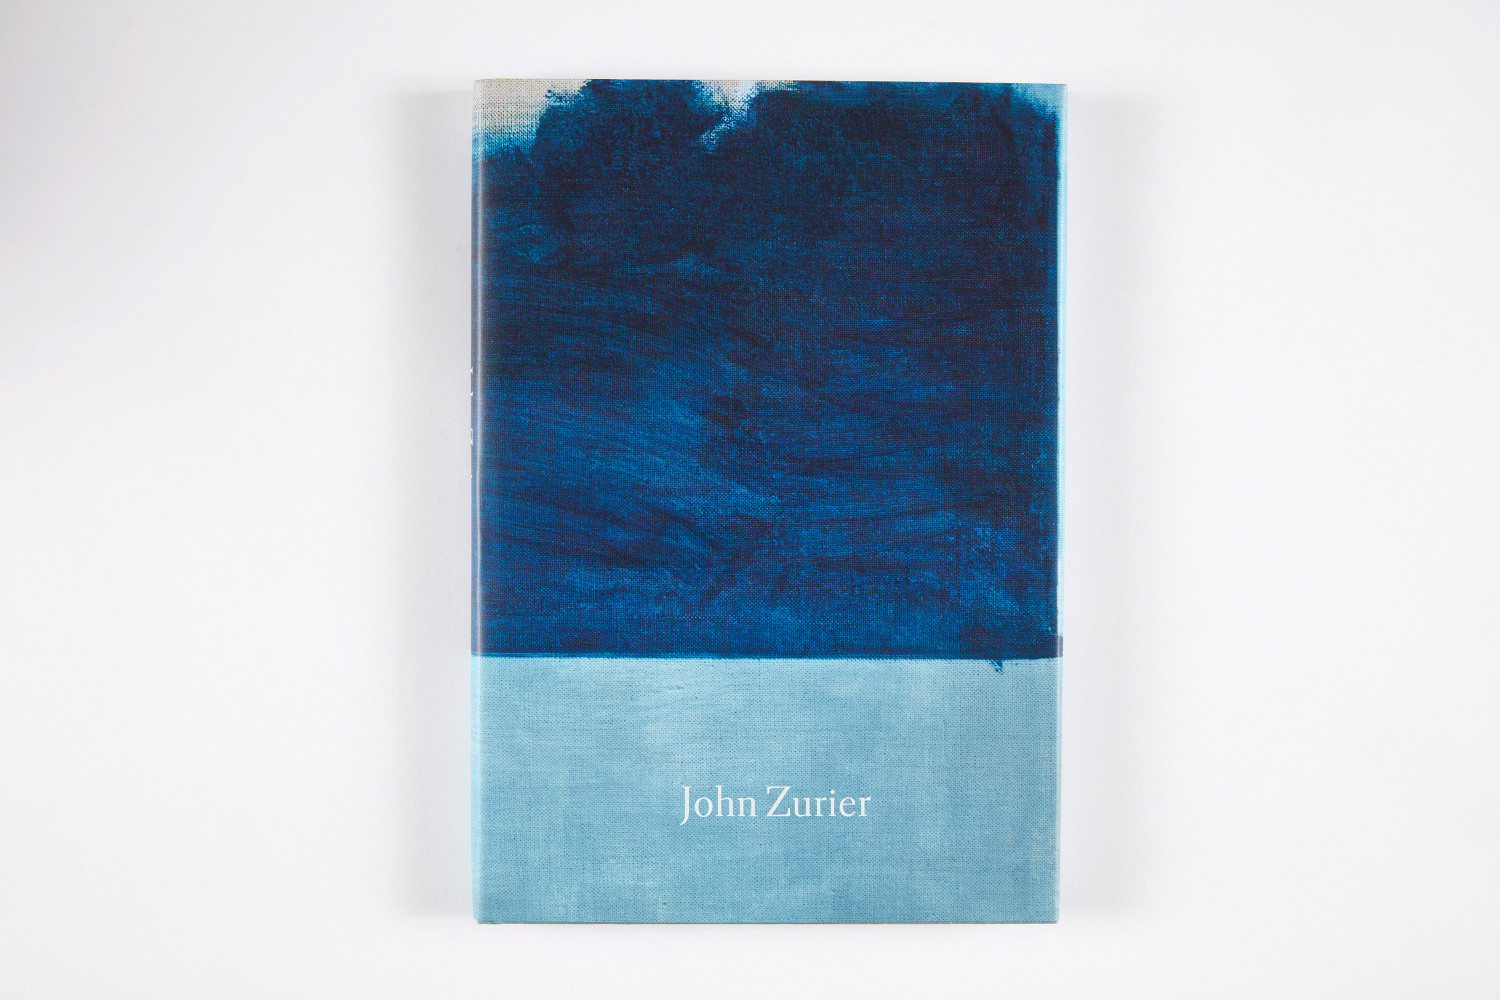 John Zurier
Paintings 1981-2014
2015

The first comprehensive overview of the artist&amp;#39;s practice.
This book contains 97 full color reproductions of his paintings with an essay by Robert Storr and foreword by Lawrence Rinder.

Click here to purchase a copy.